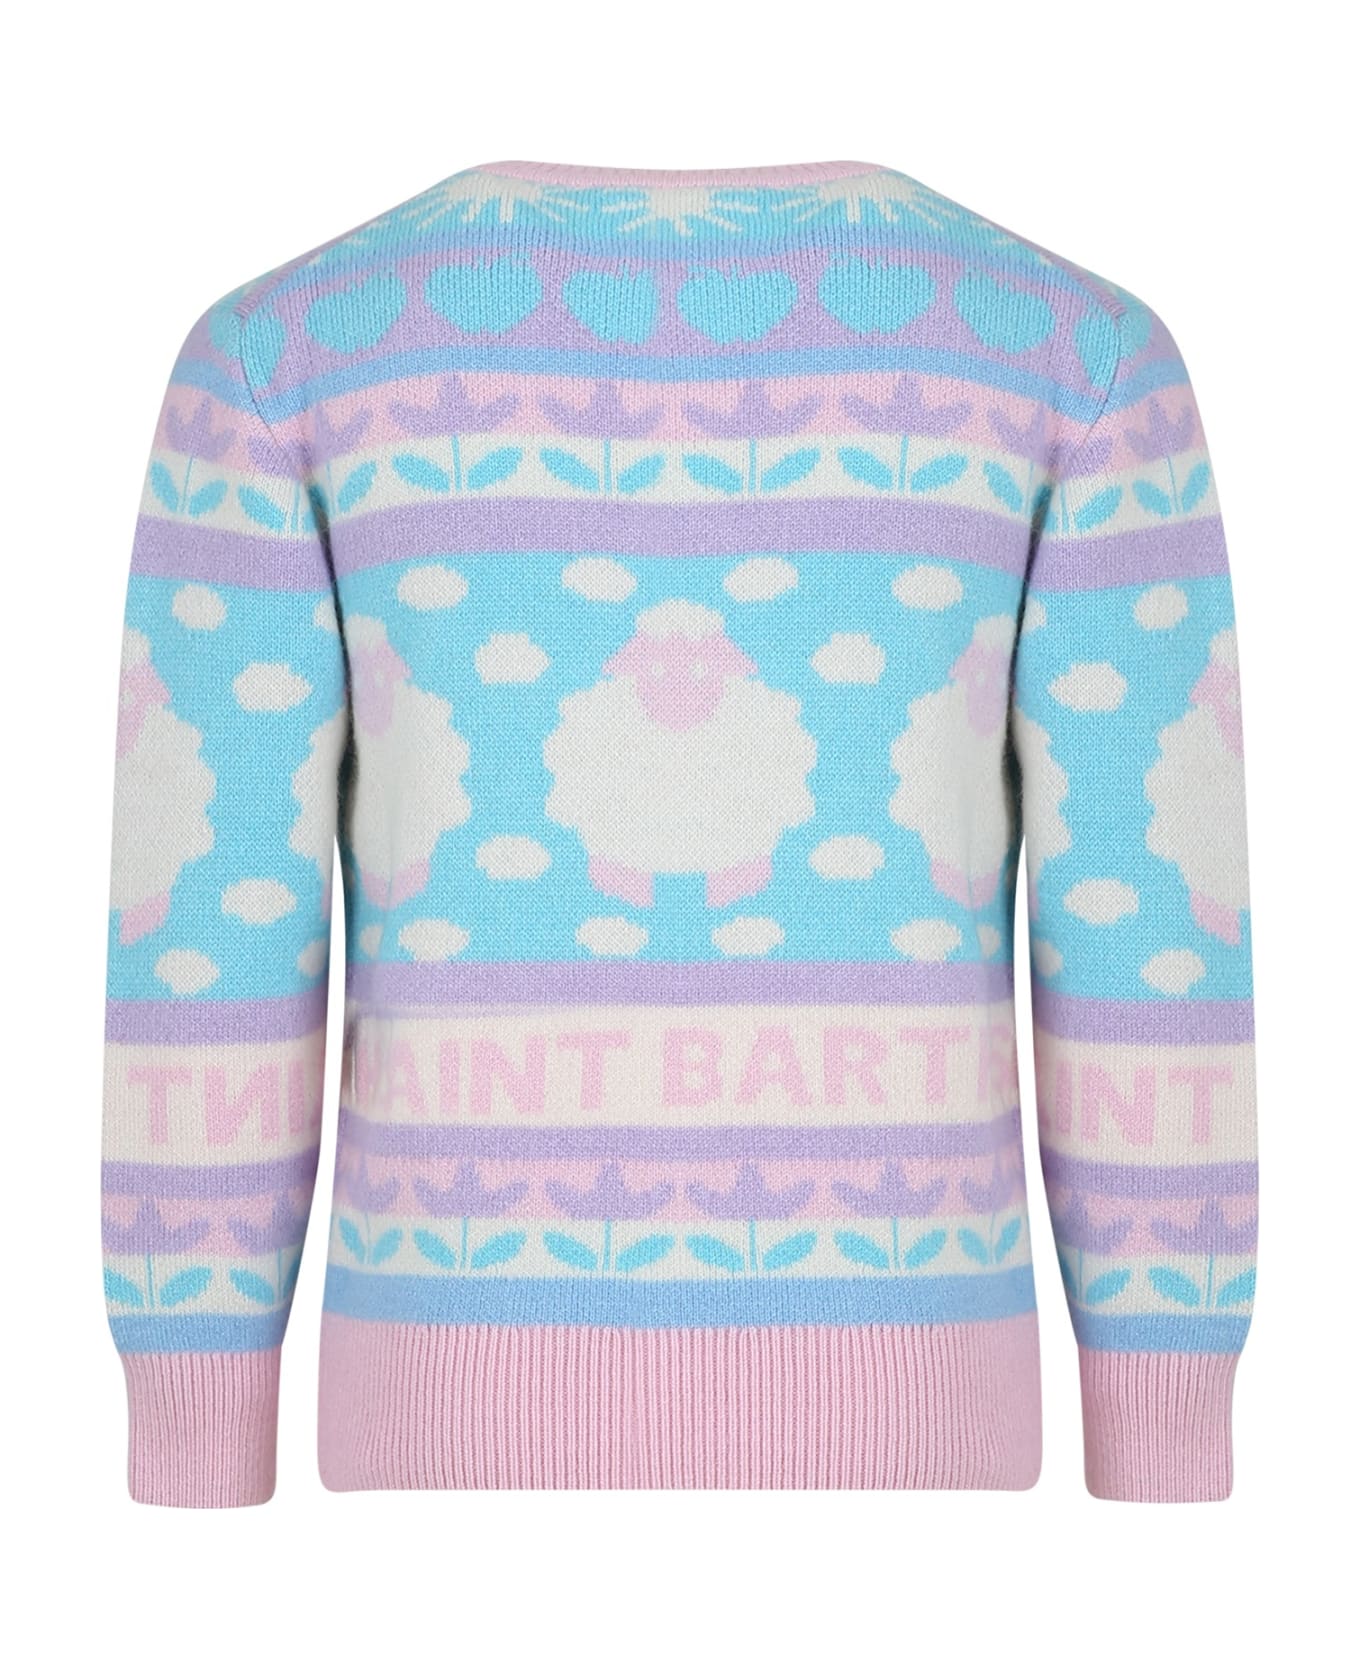 MC2 Saint Barth Light Blue Sweater For Girl With Logo And Jacqurd Motif - Multicolor